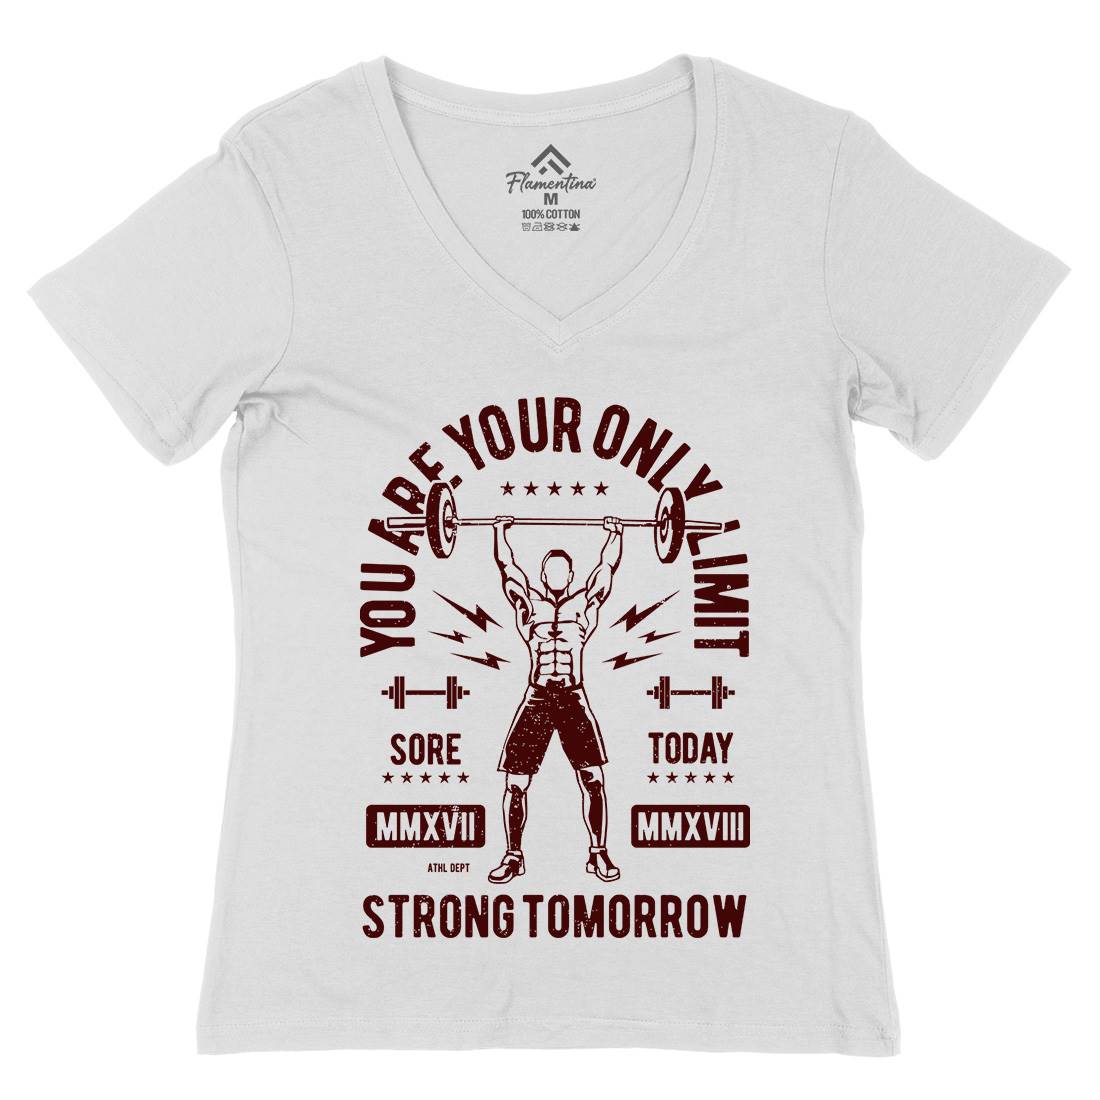 You Are Your Only Limit Womens Organic V-Neck T-Shirt Gym A799